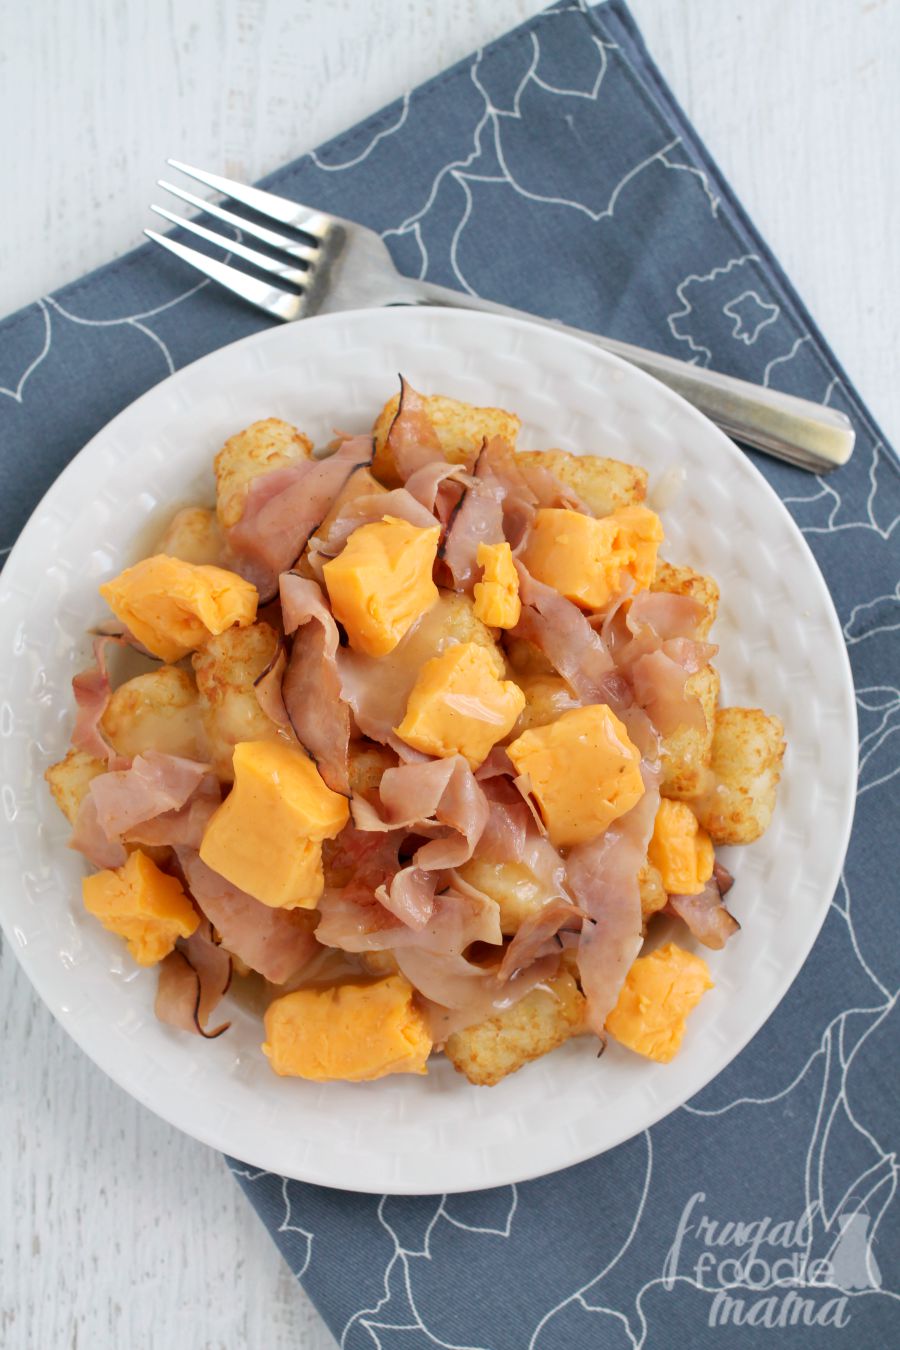 Frugal Foodie Mama: Ham & Cheese Tater Tot Poutine